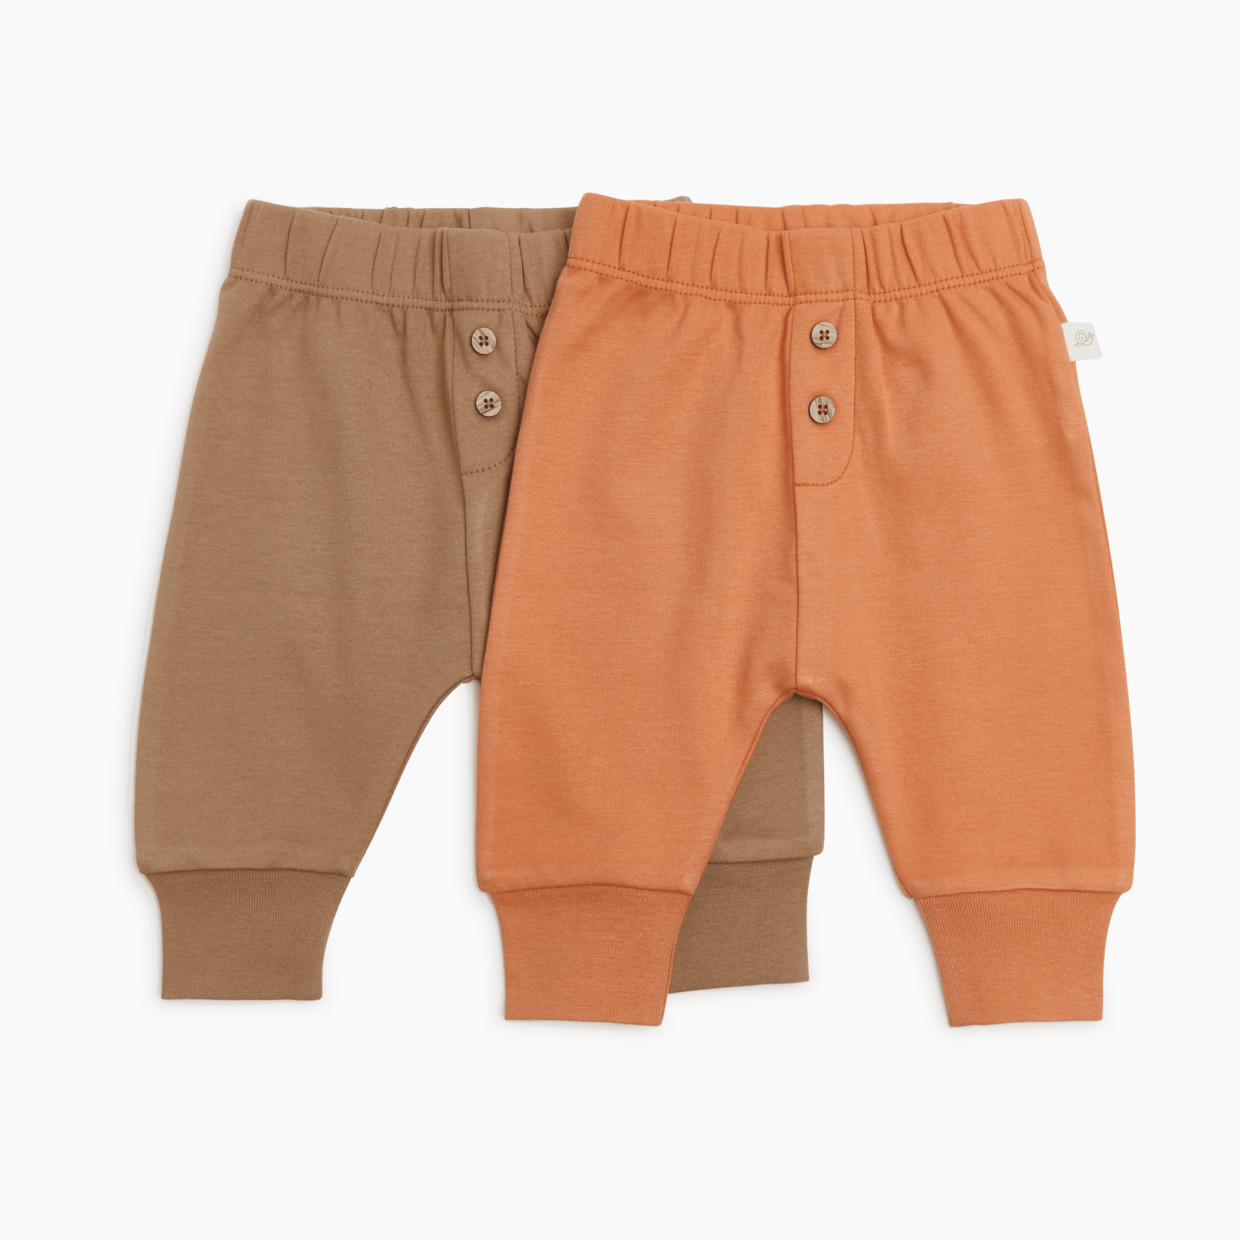 Tiny Kind 2 Pack Pants - Neutral Pack, 6-9 M.